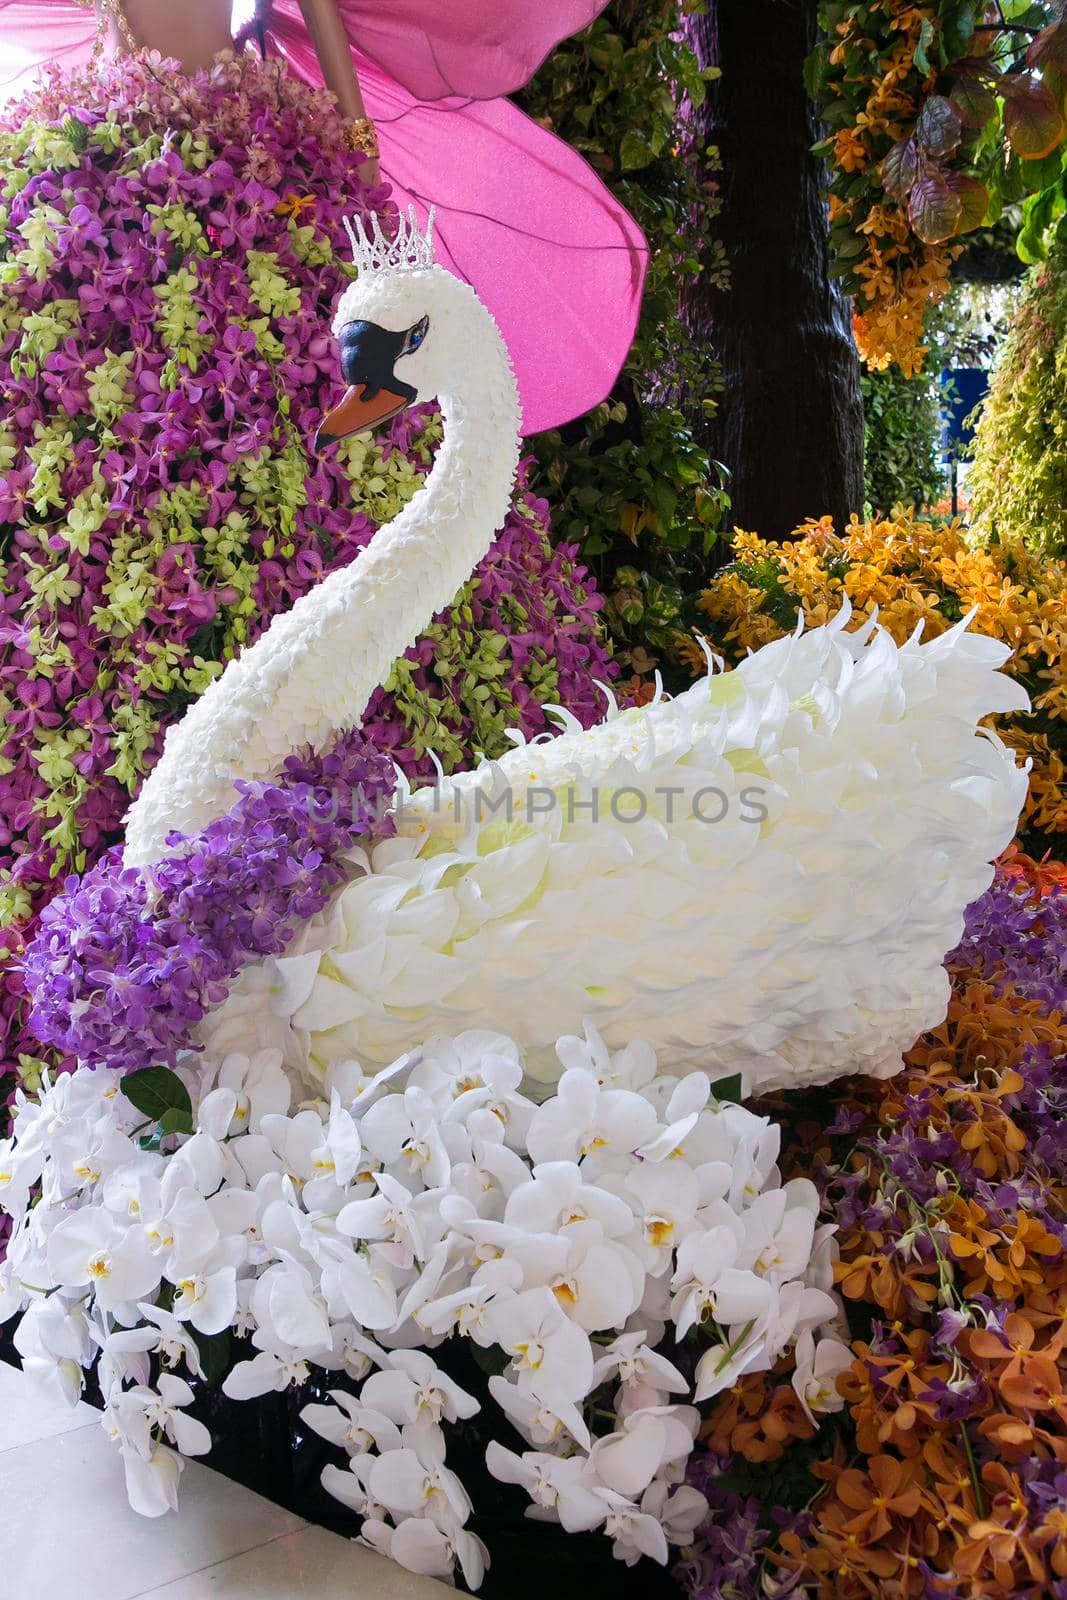 Swan made from orchid flowers.